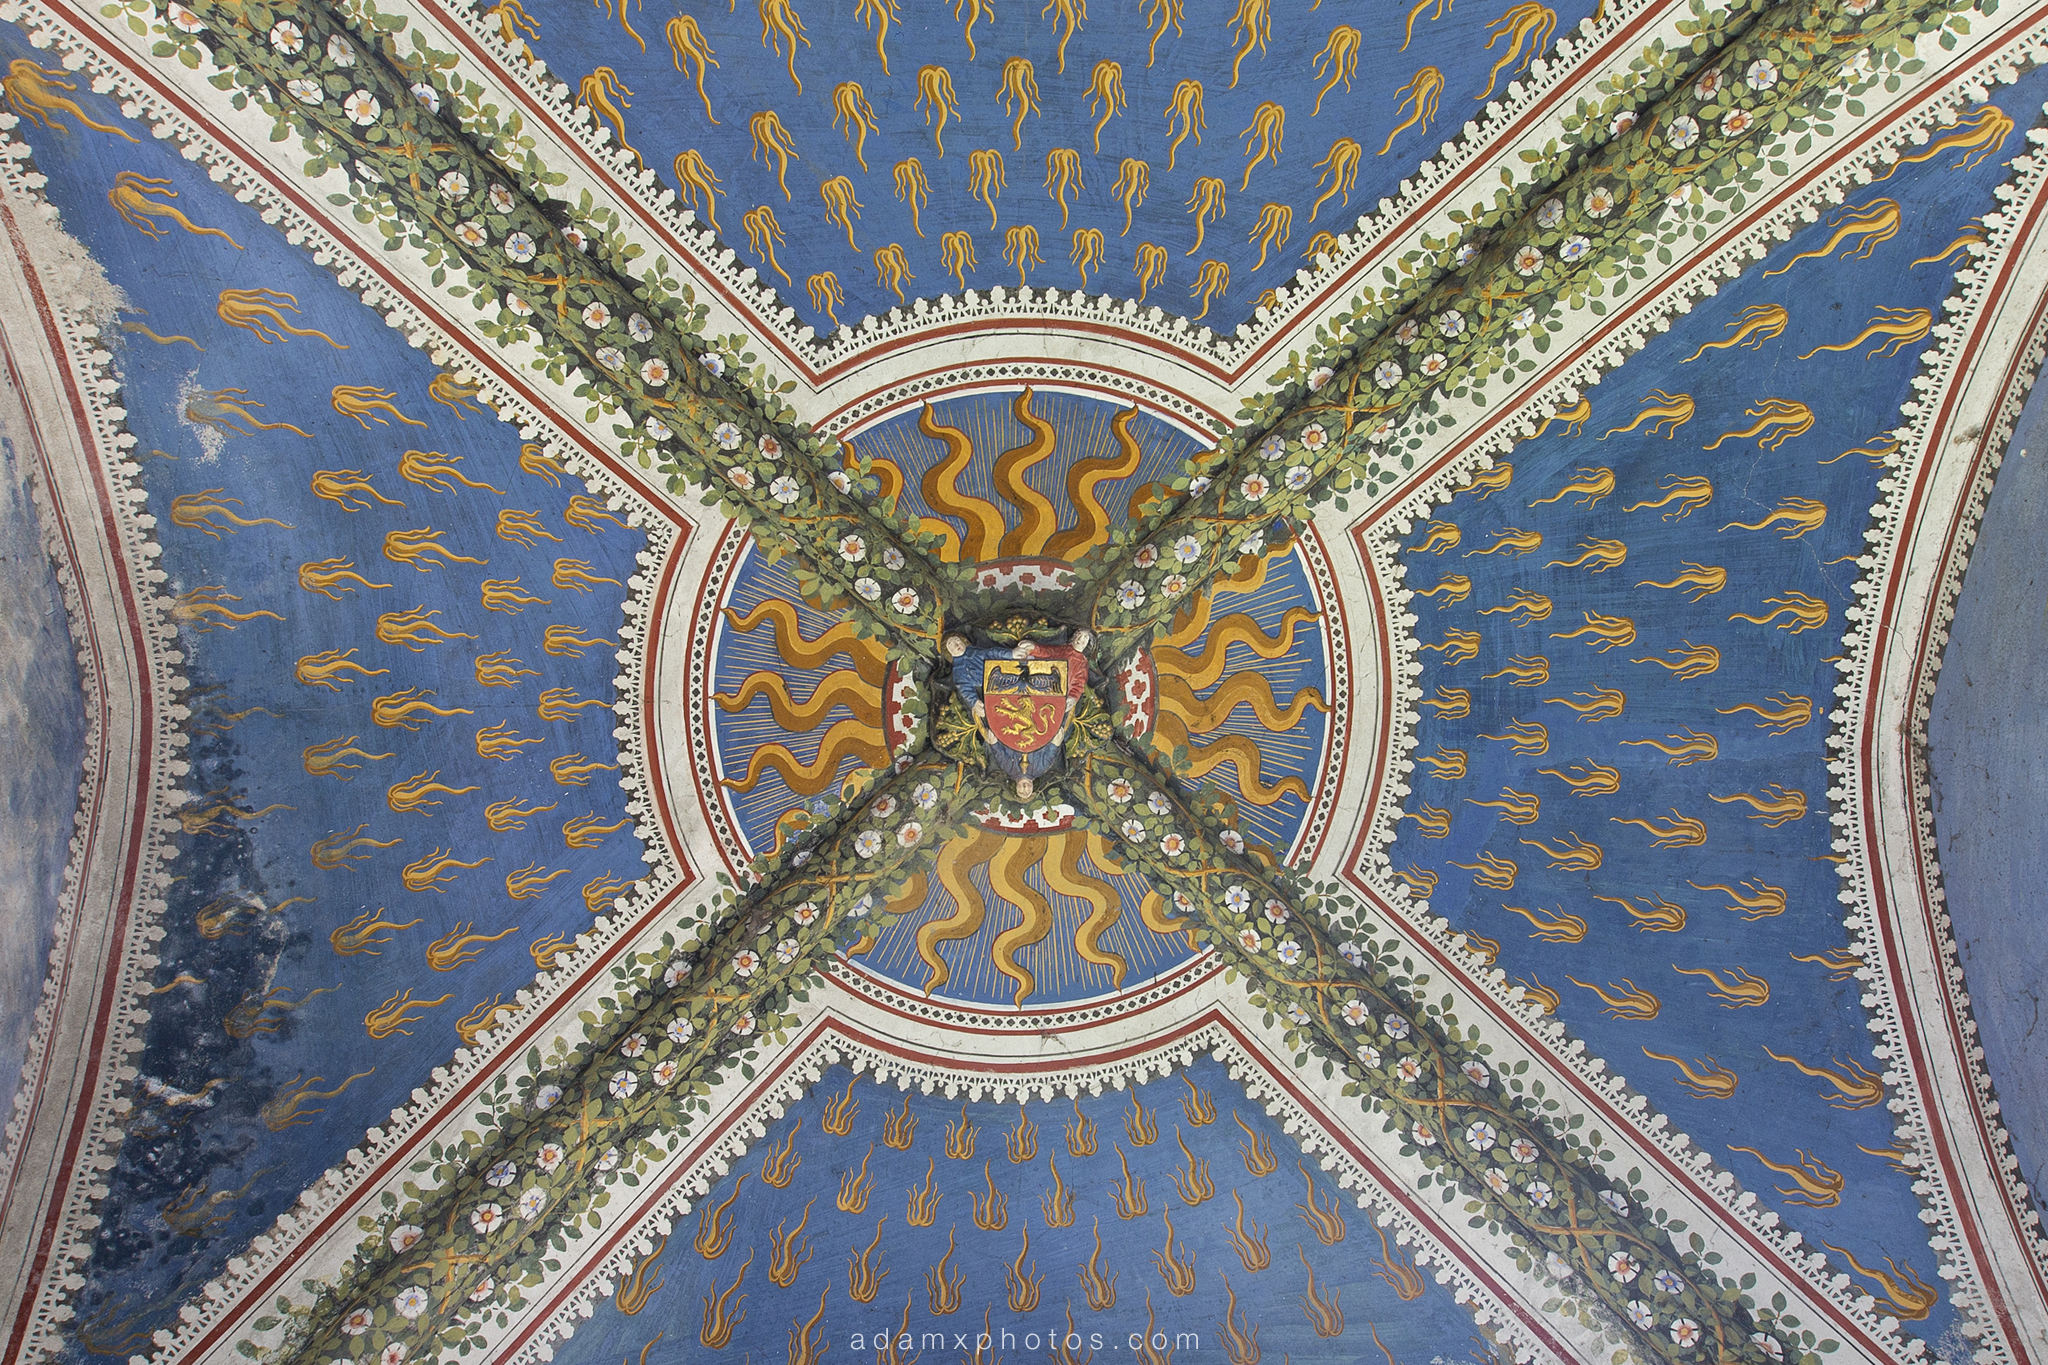 Castello di R Italy castle Urbex Adam X Urban Exploration chapel ceiling detail painted ornate grand crest emblem badge motif photo photos report decay detail UE abandoned derelict unused empty disused decay decayed decaying grimy grime